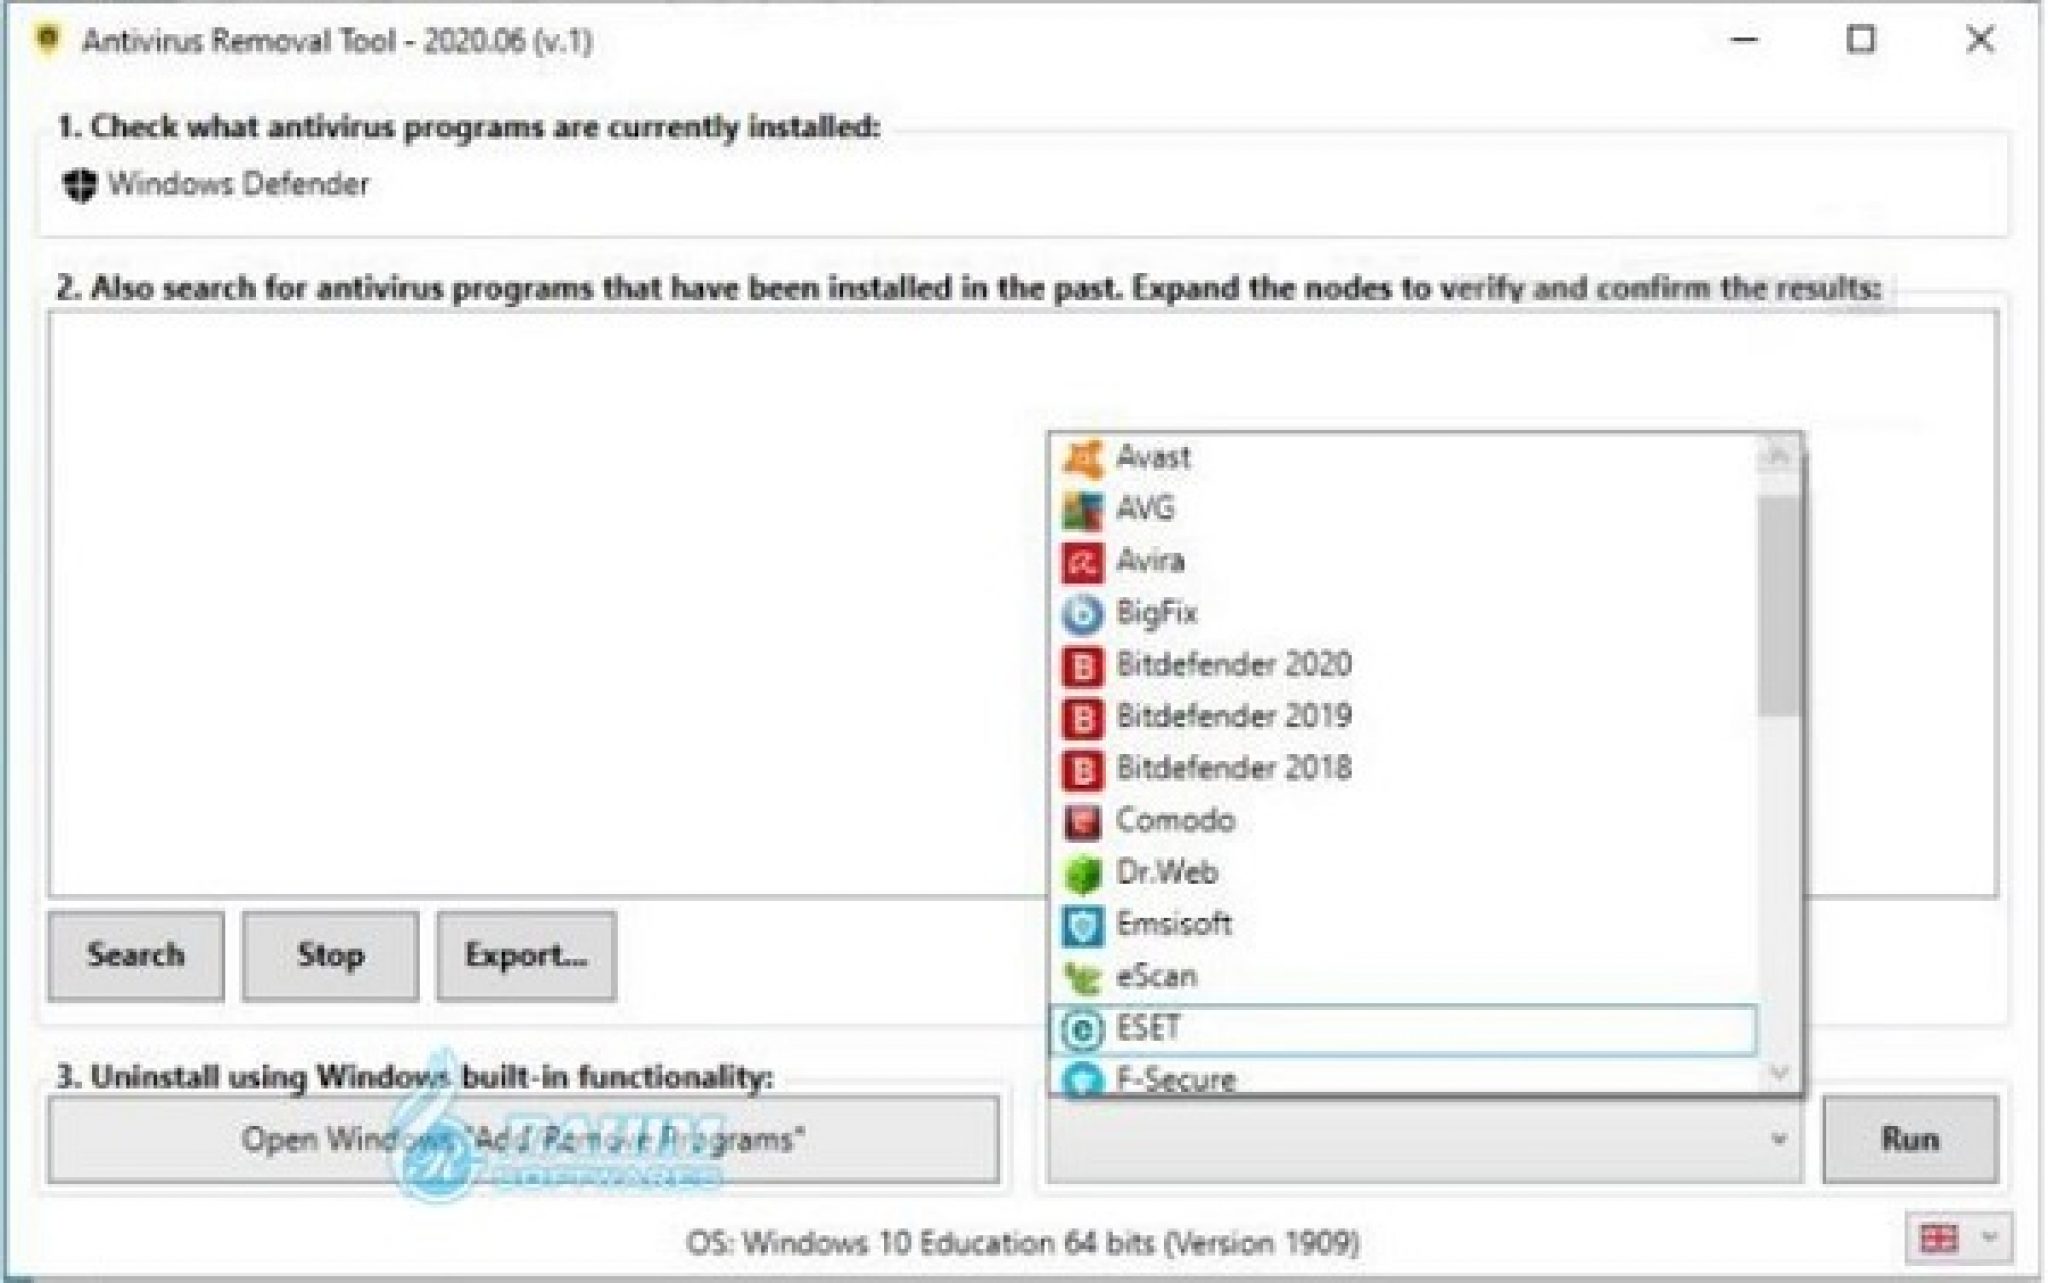 download the new Antivirus Removal Tool 2023.06 (v.1)